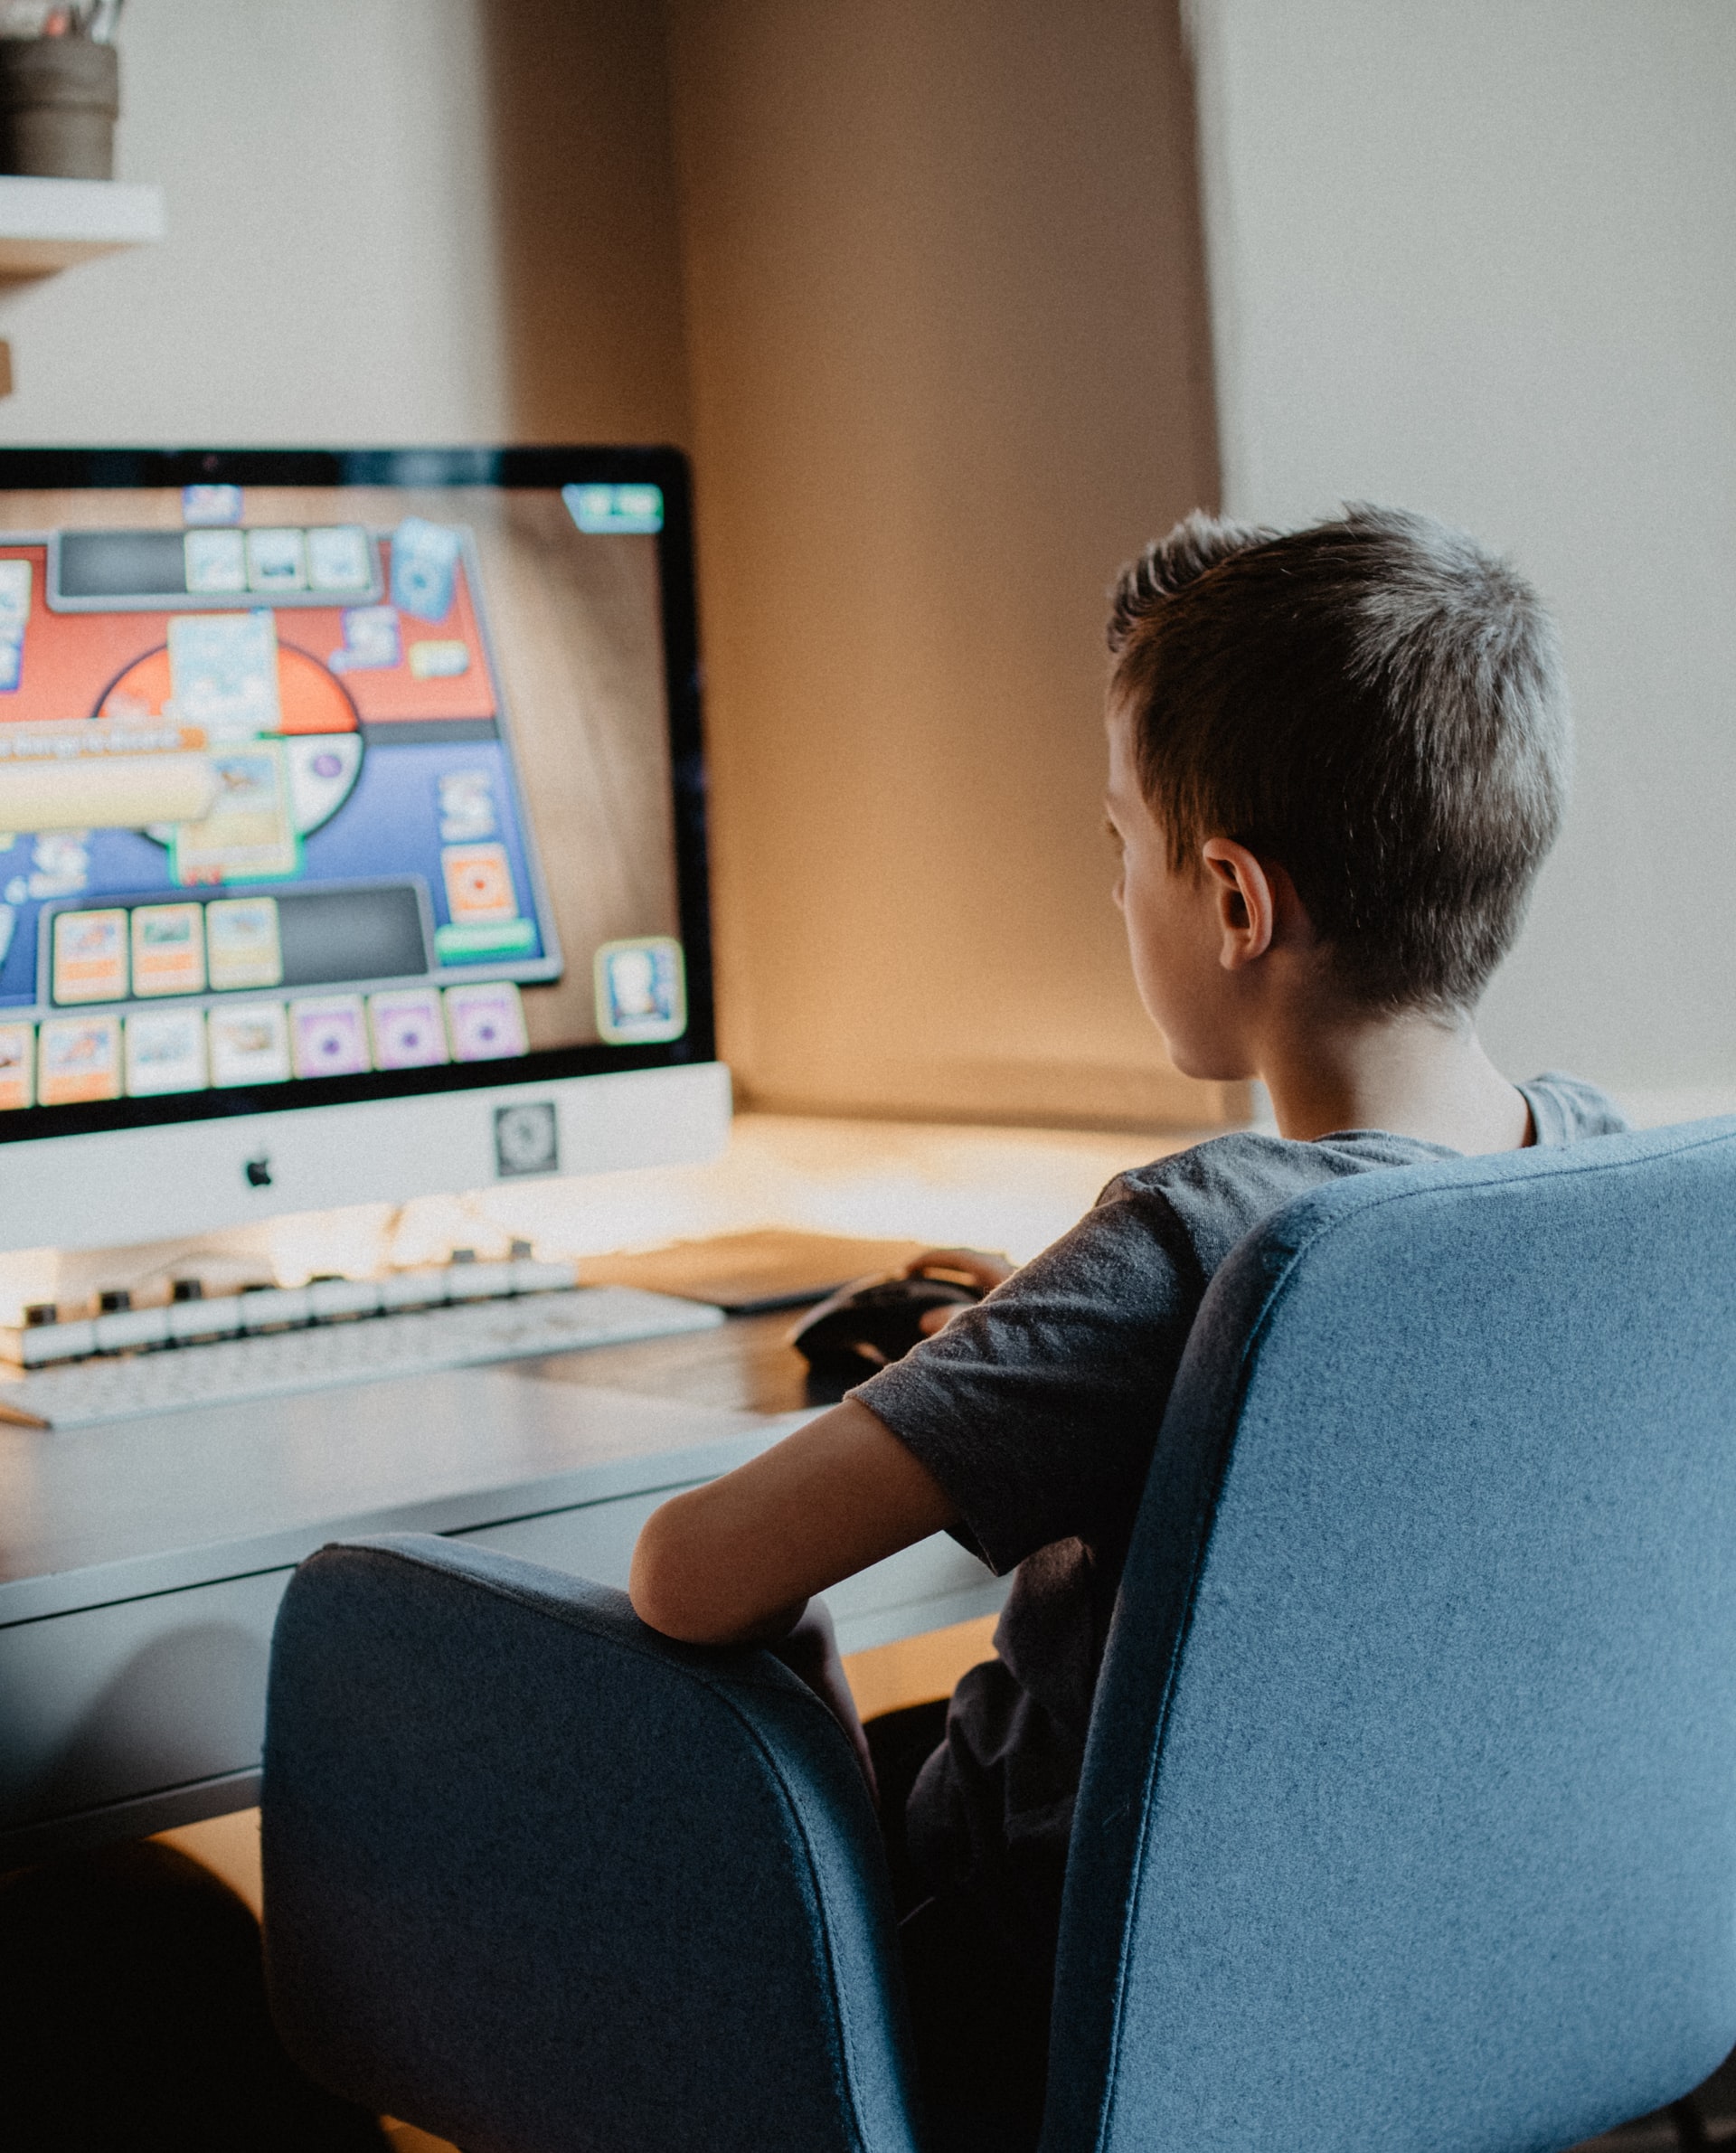 What Are the Benefits of Playing Online Games for Kids?